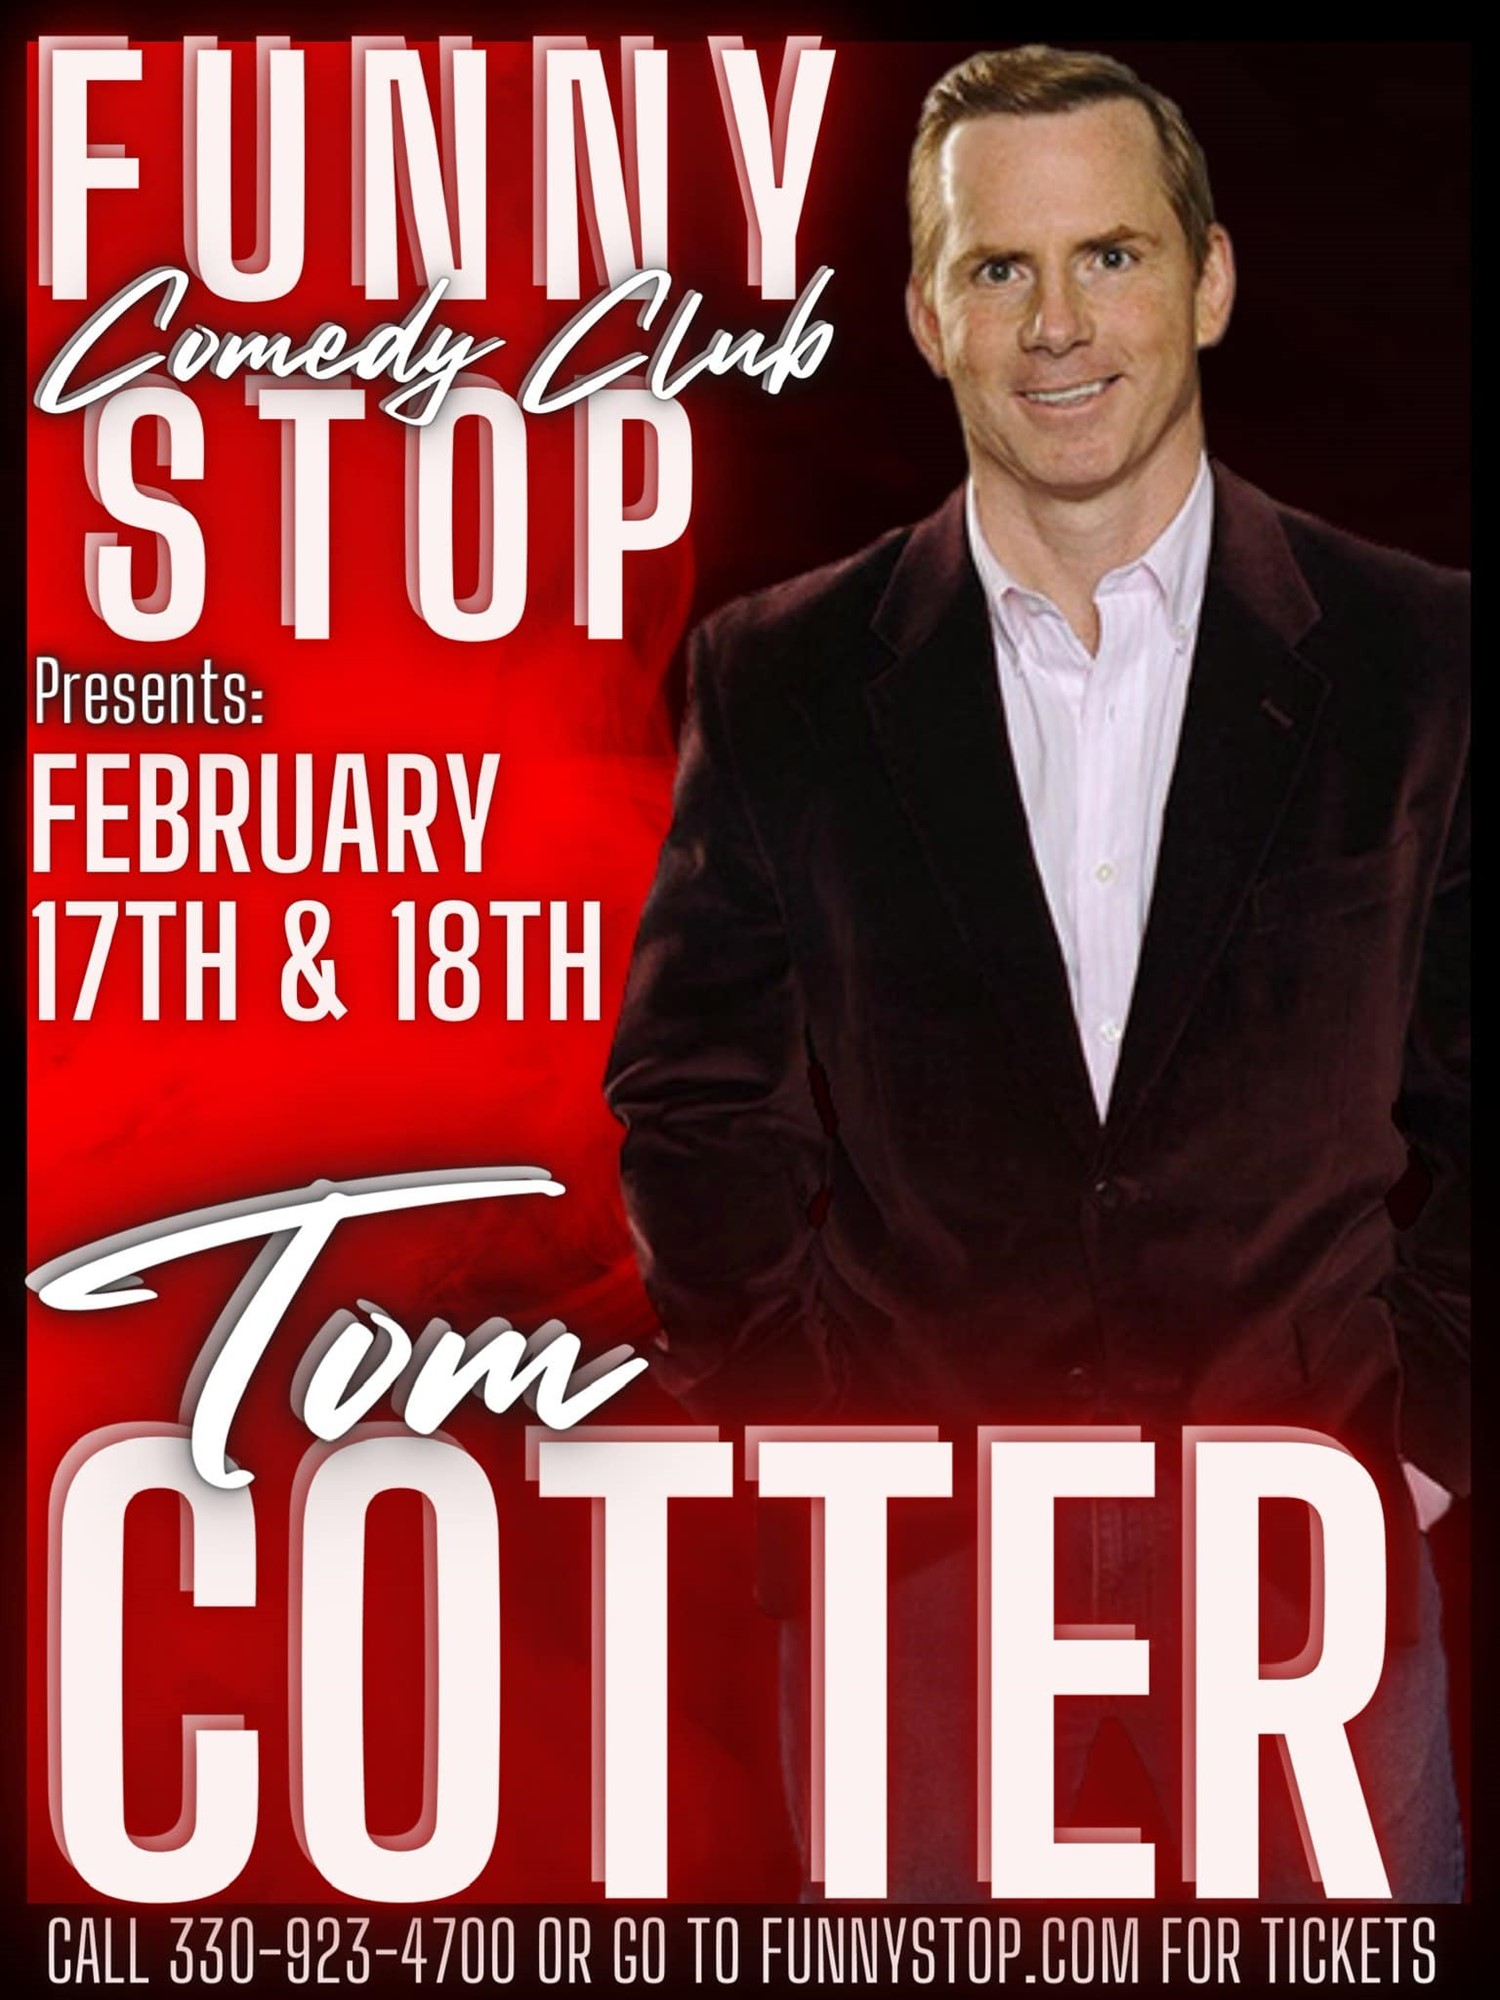 Tom Cotter Fri. 9:30pm Show Funny Stop Comedy Club on Feb 17, 21:30@Funny Stop Comedy Club - Buy tickets and Get information on Funny Stop funnystop.online